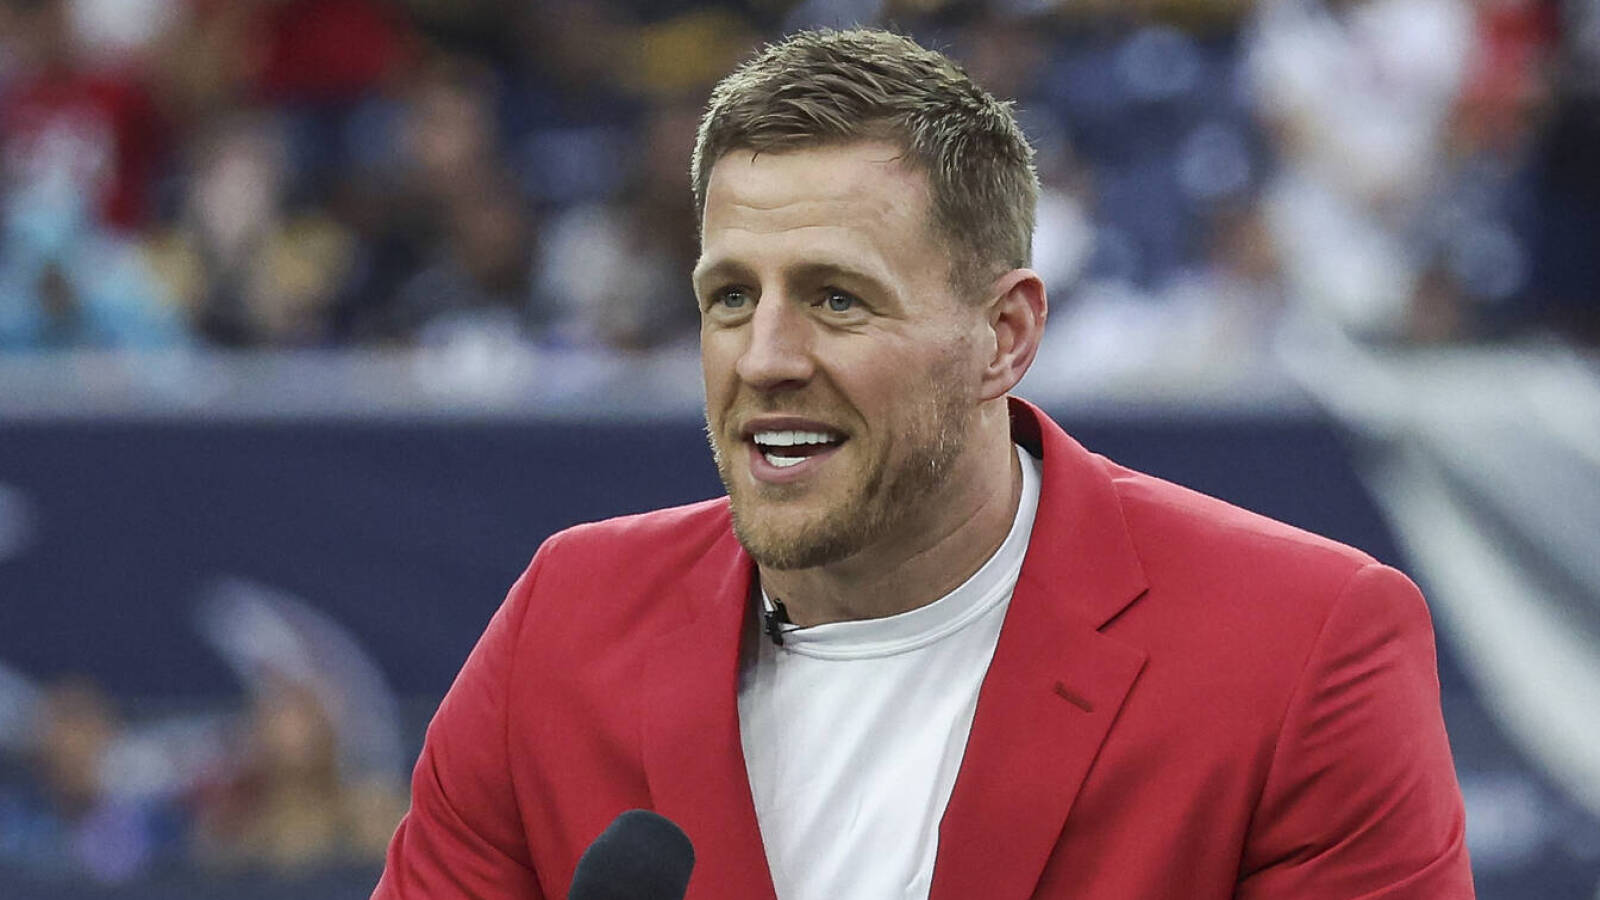 J.J. Watt reveals his thoughts on a potential NFL comeback